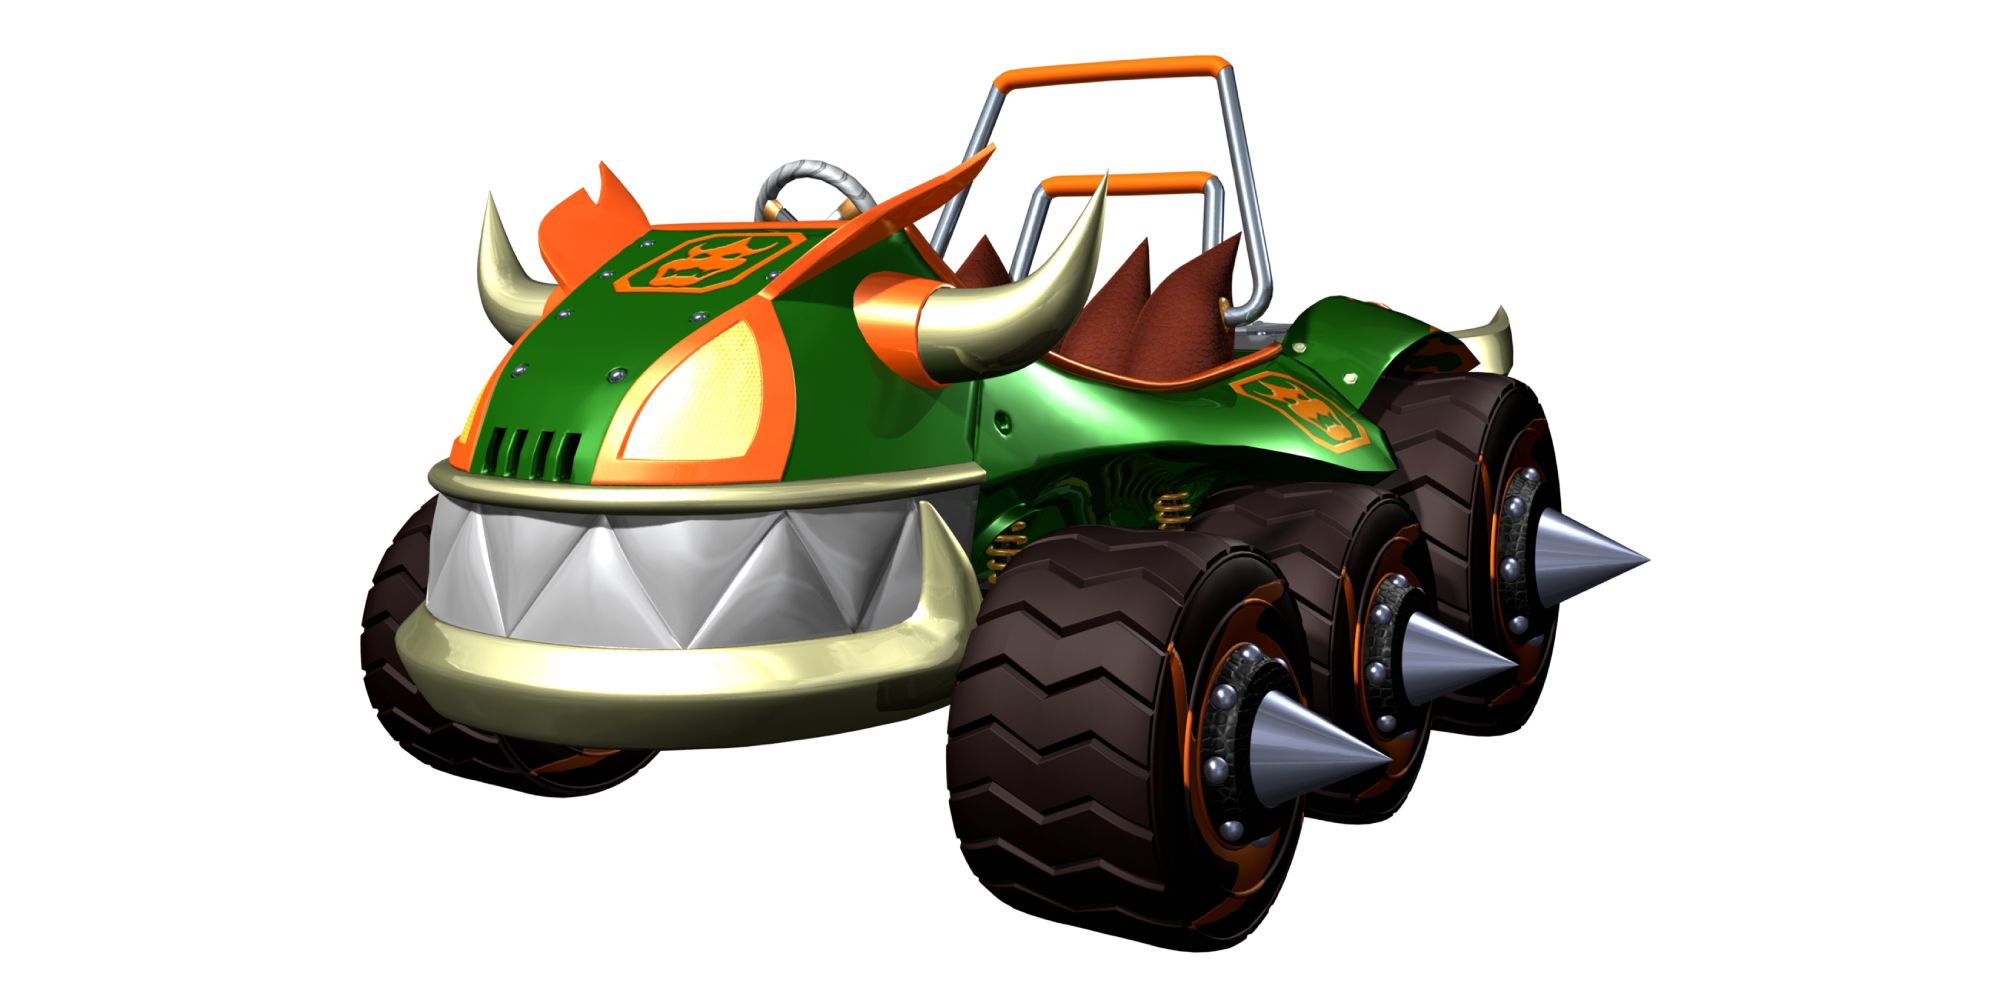 Mario Kart Vehicle Designs an empty Koopa King kart with spikes sticking out of its wheels and horns from the front against a white background